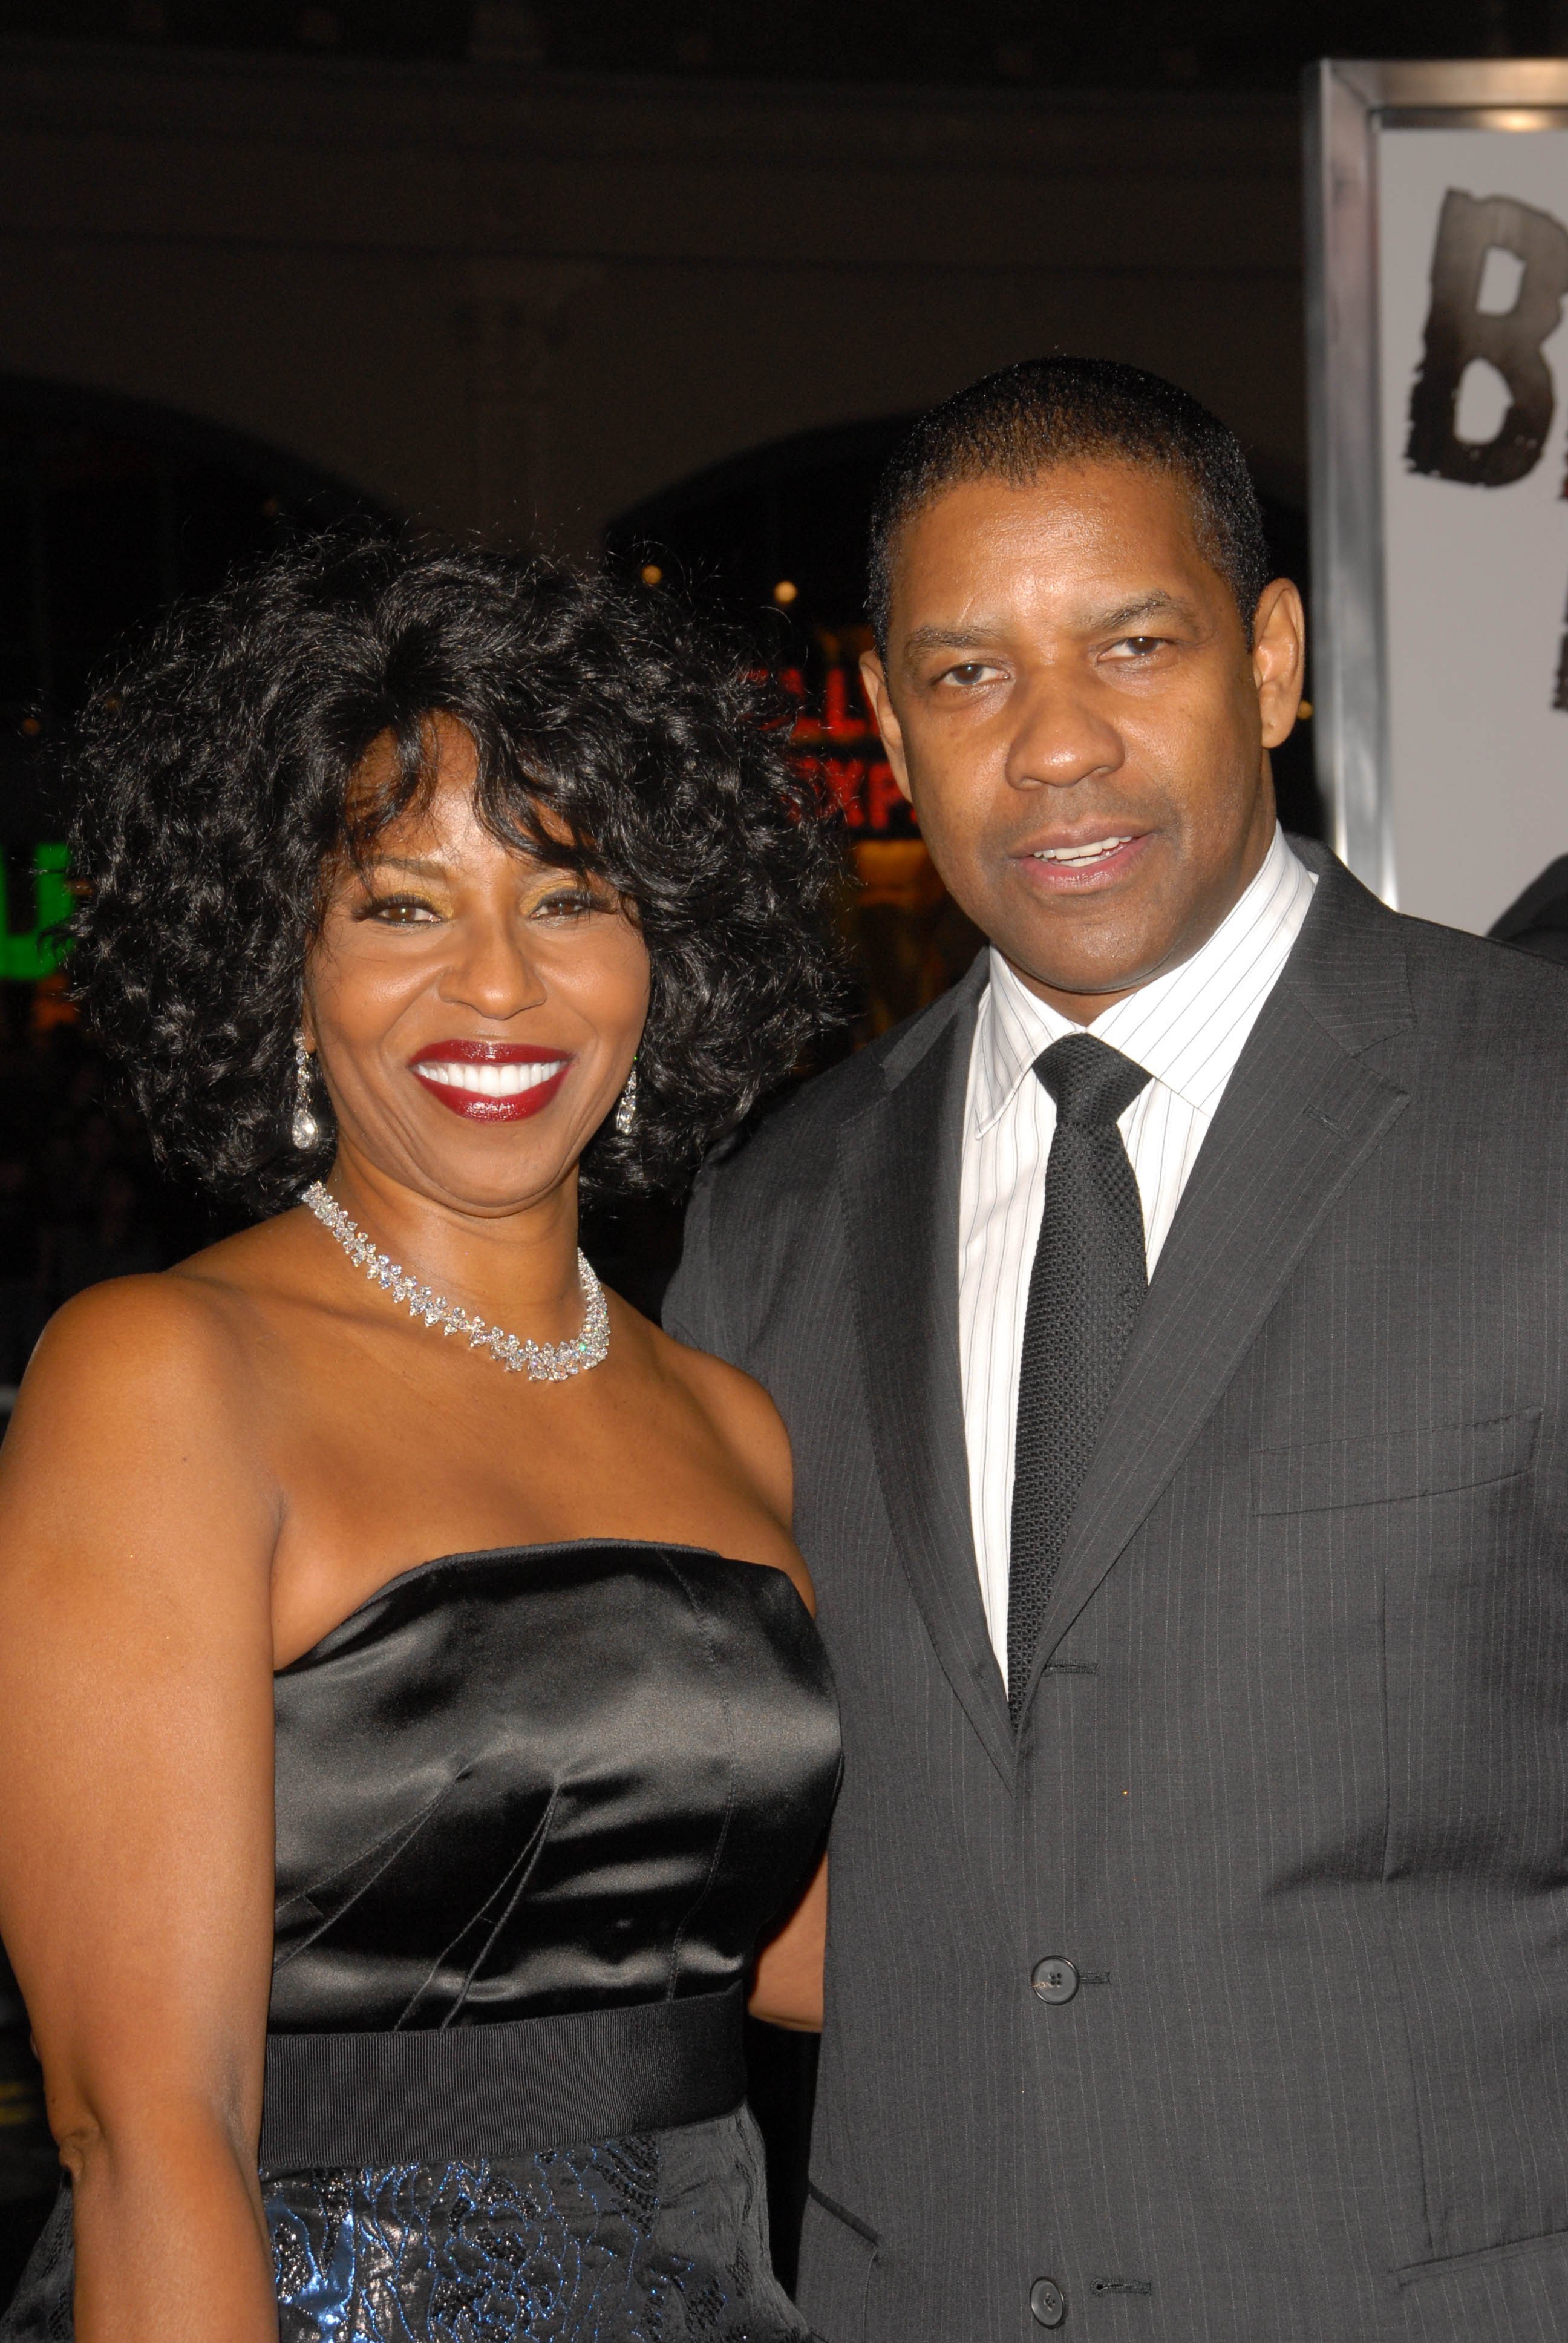 Denzel Washington and wife Pauletta at “The Book Of Eli” premiere in Hollywood on January 11, 2010 l Source: Shutterstock